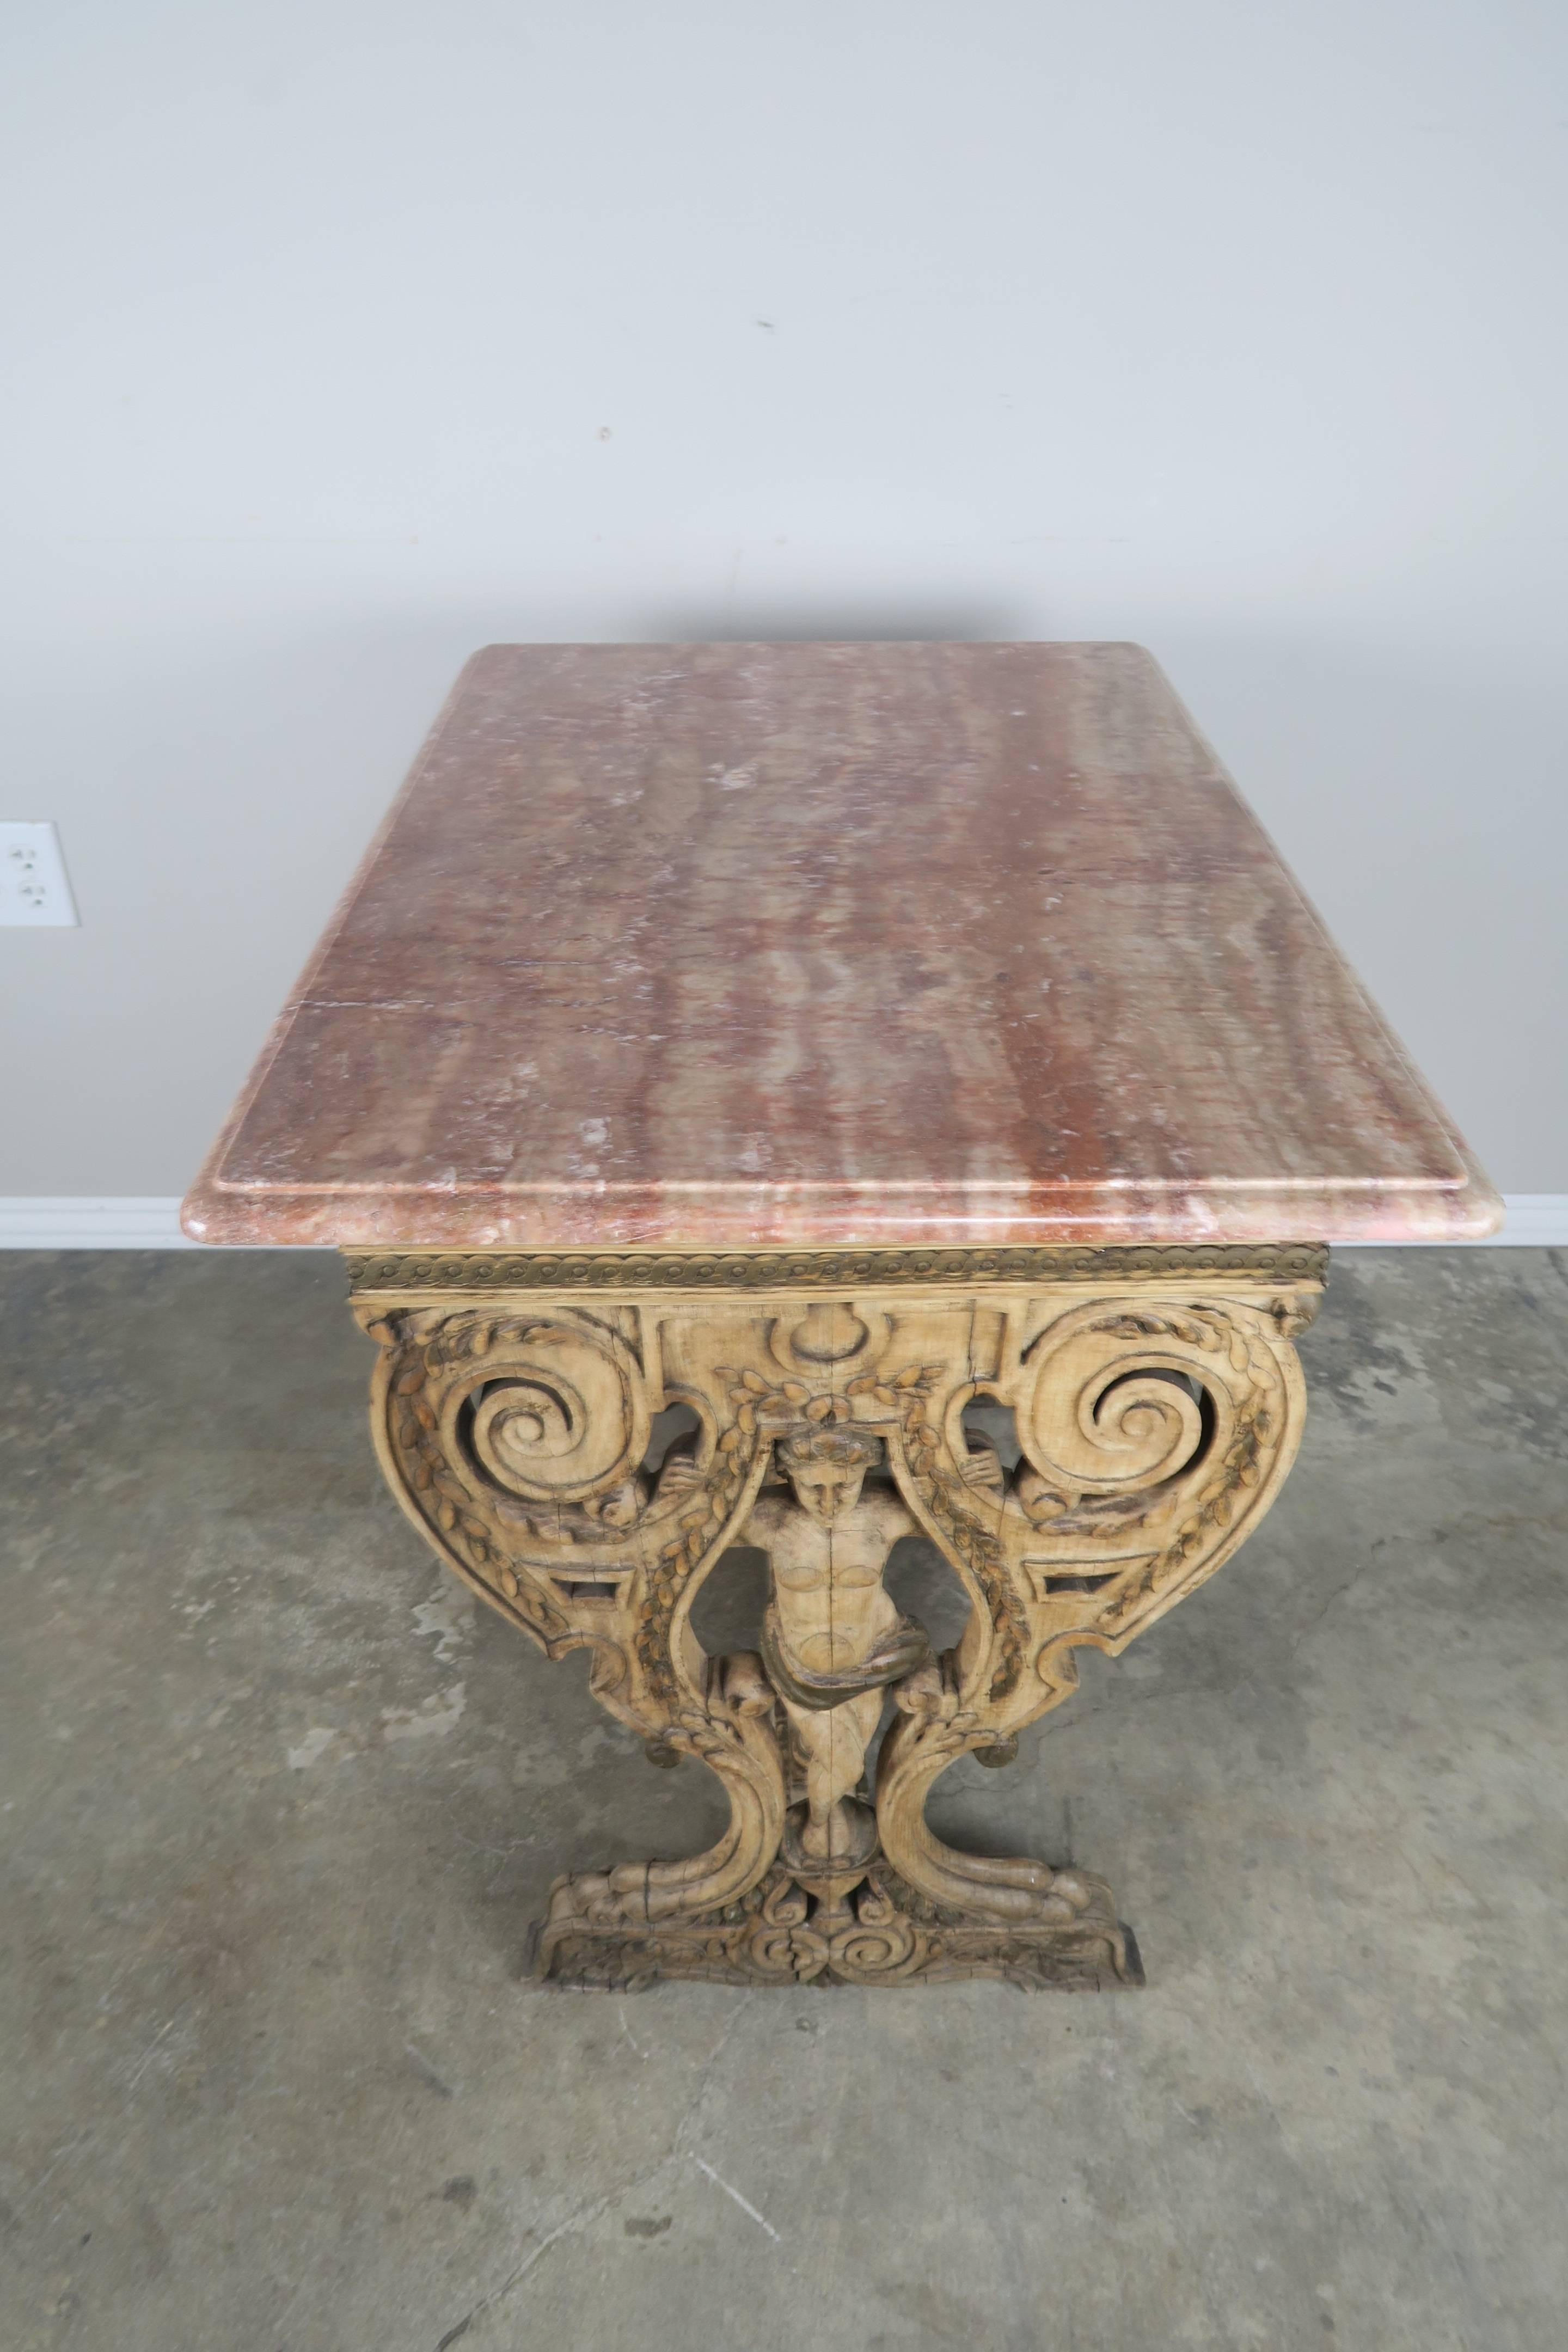 19th century Italian bleached walnut carved figural table with original terra cotta and golden marble top.